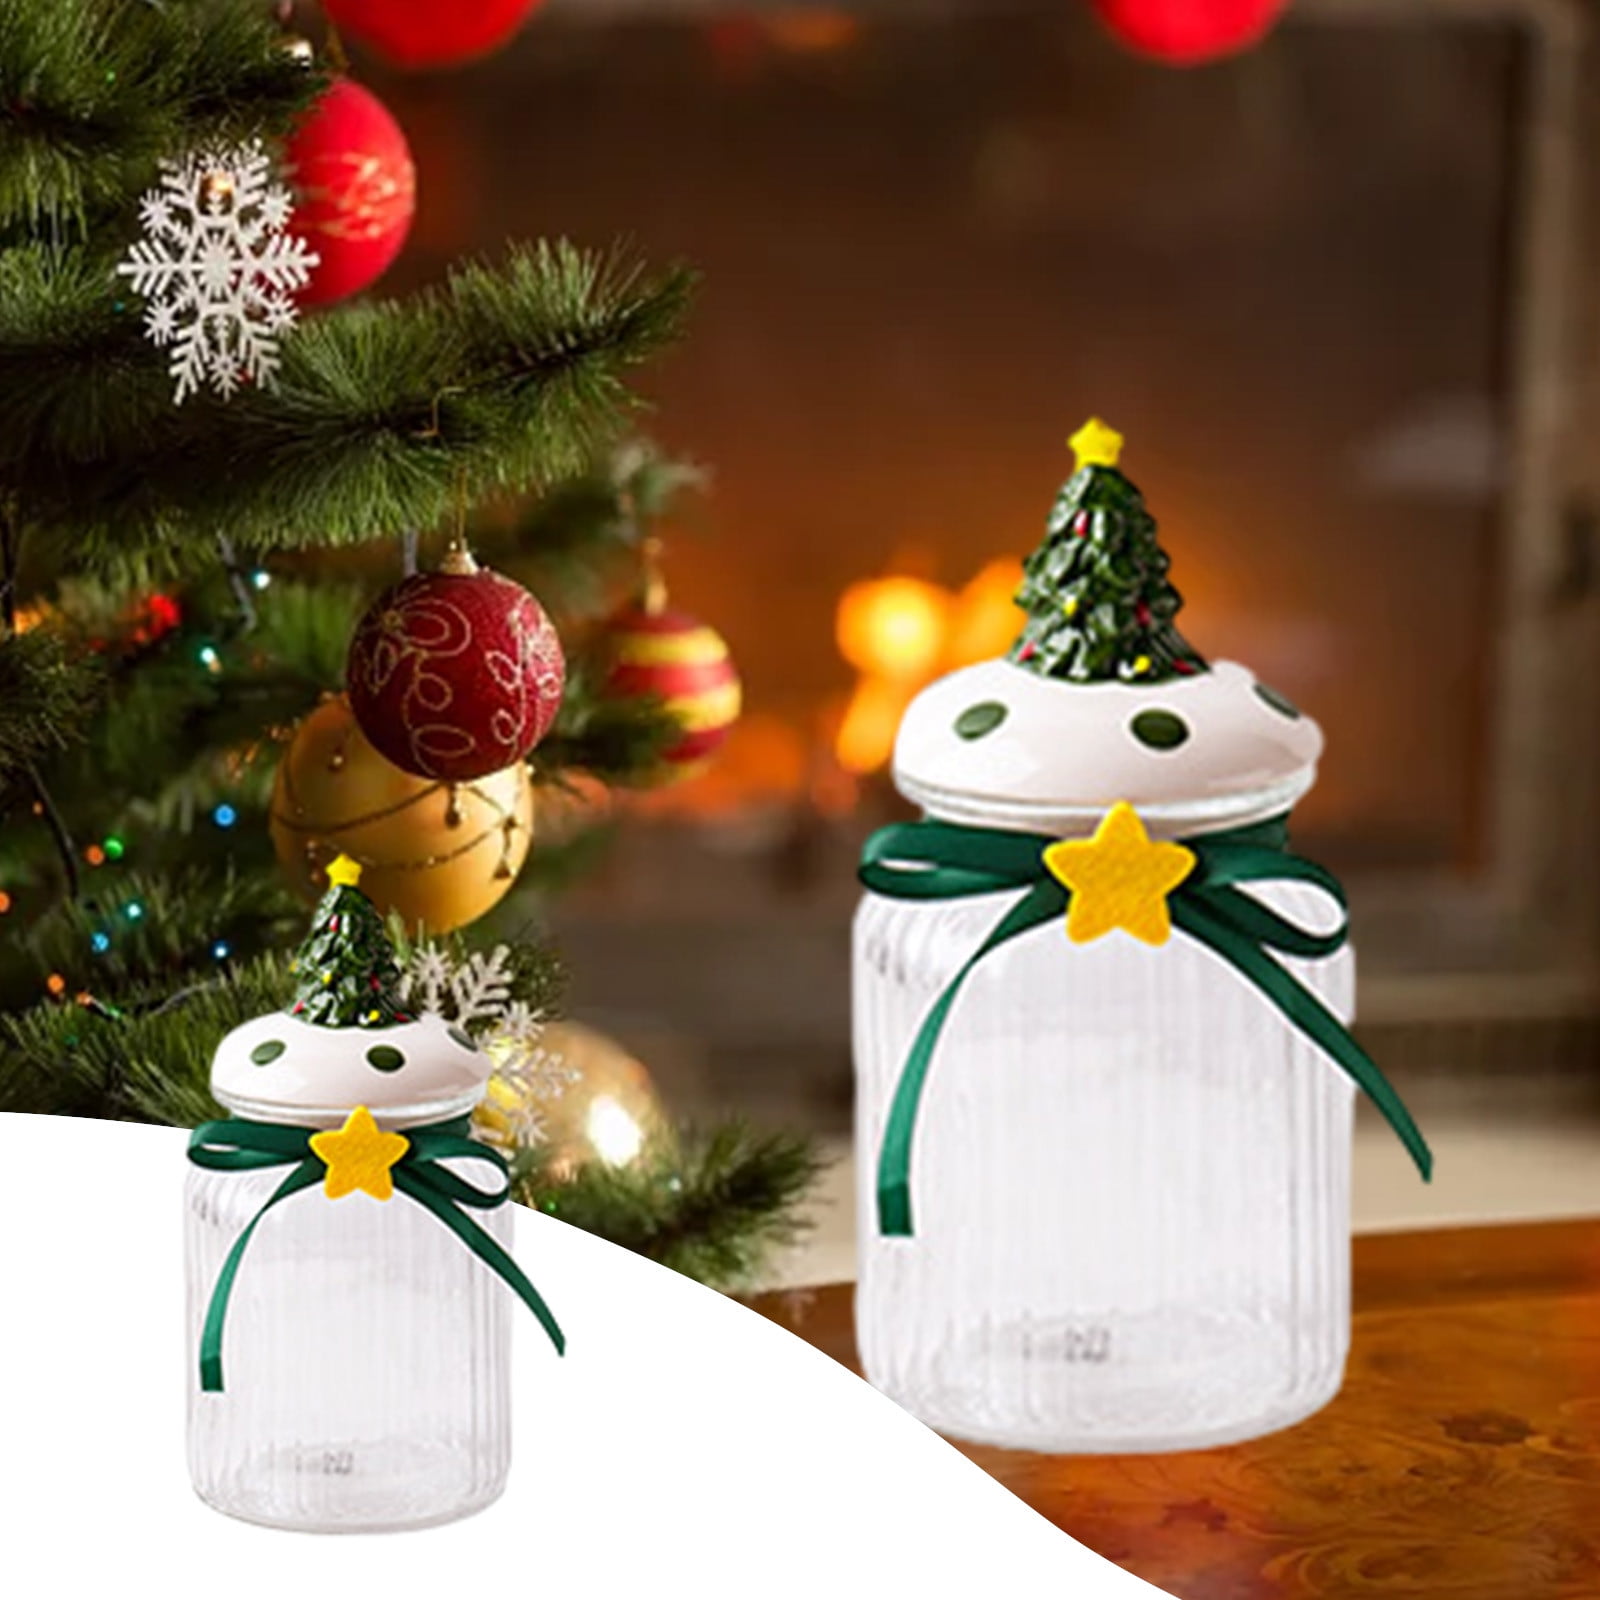 Aldi Is Selling Ornament Sippers That'll Add Cheer To Your Year